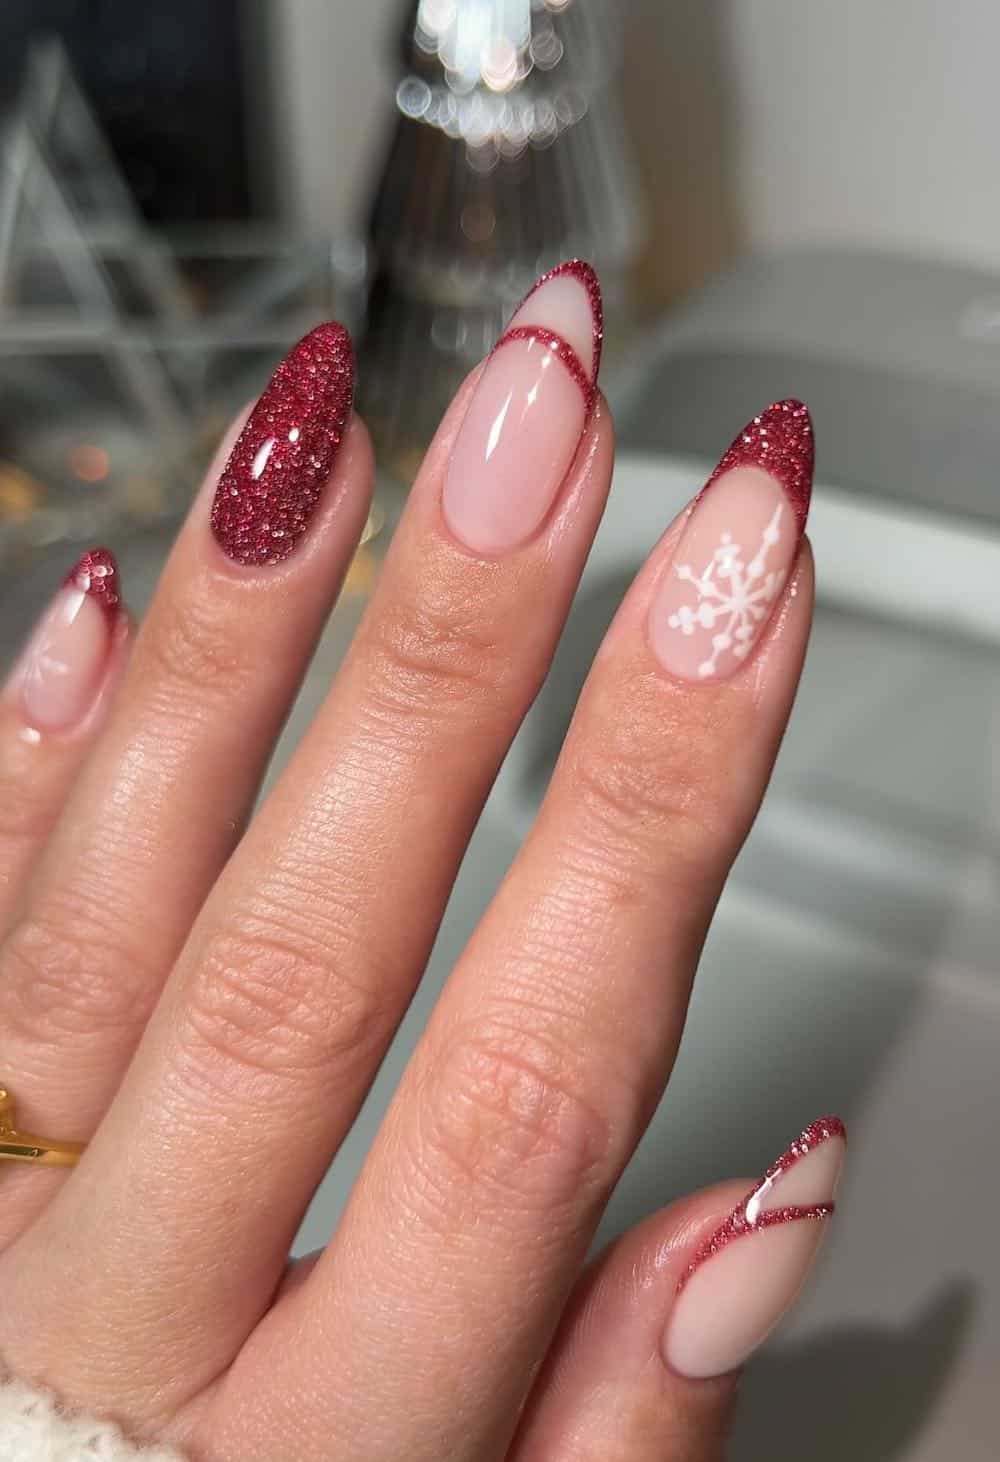 Red glitter french tip nails with snowflake detail.